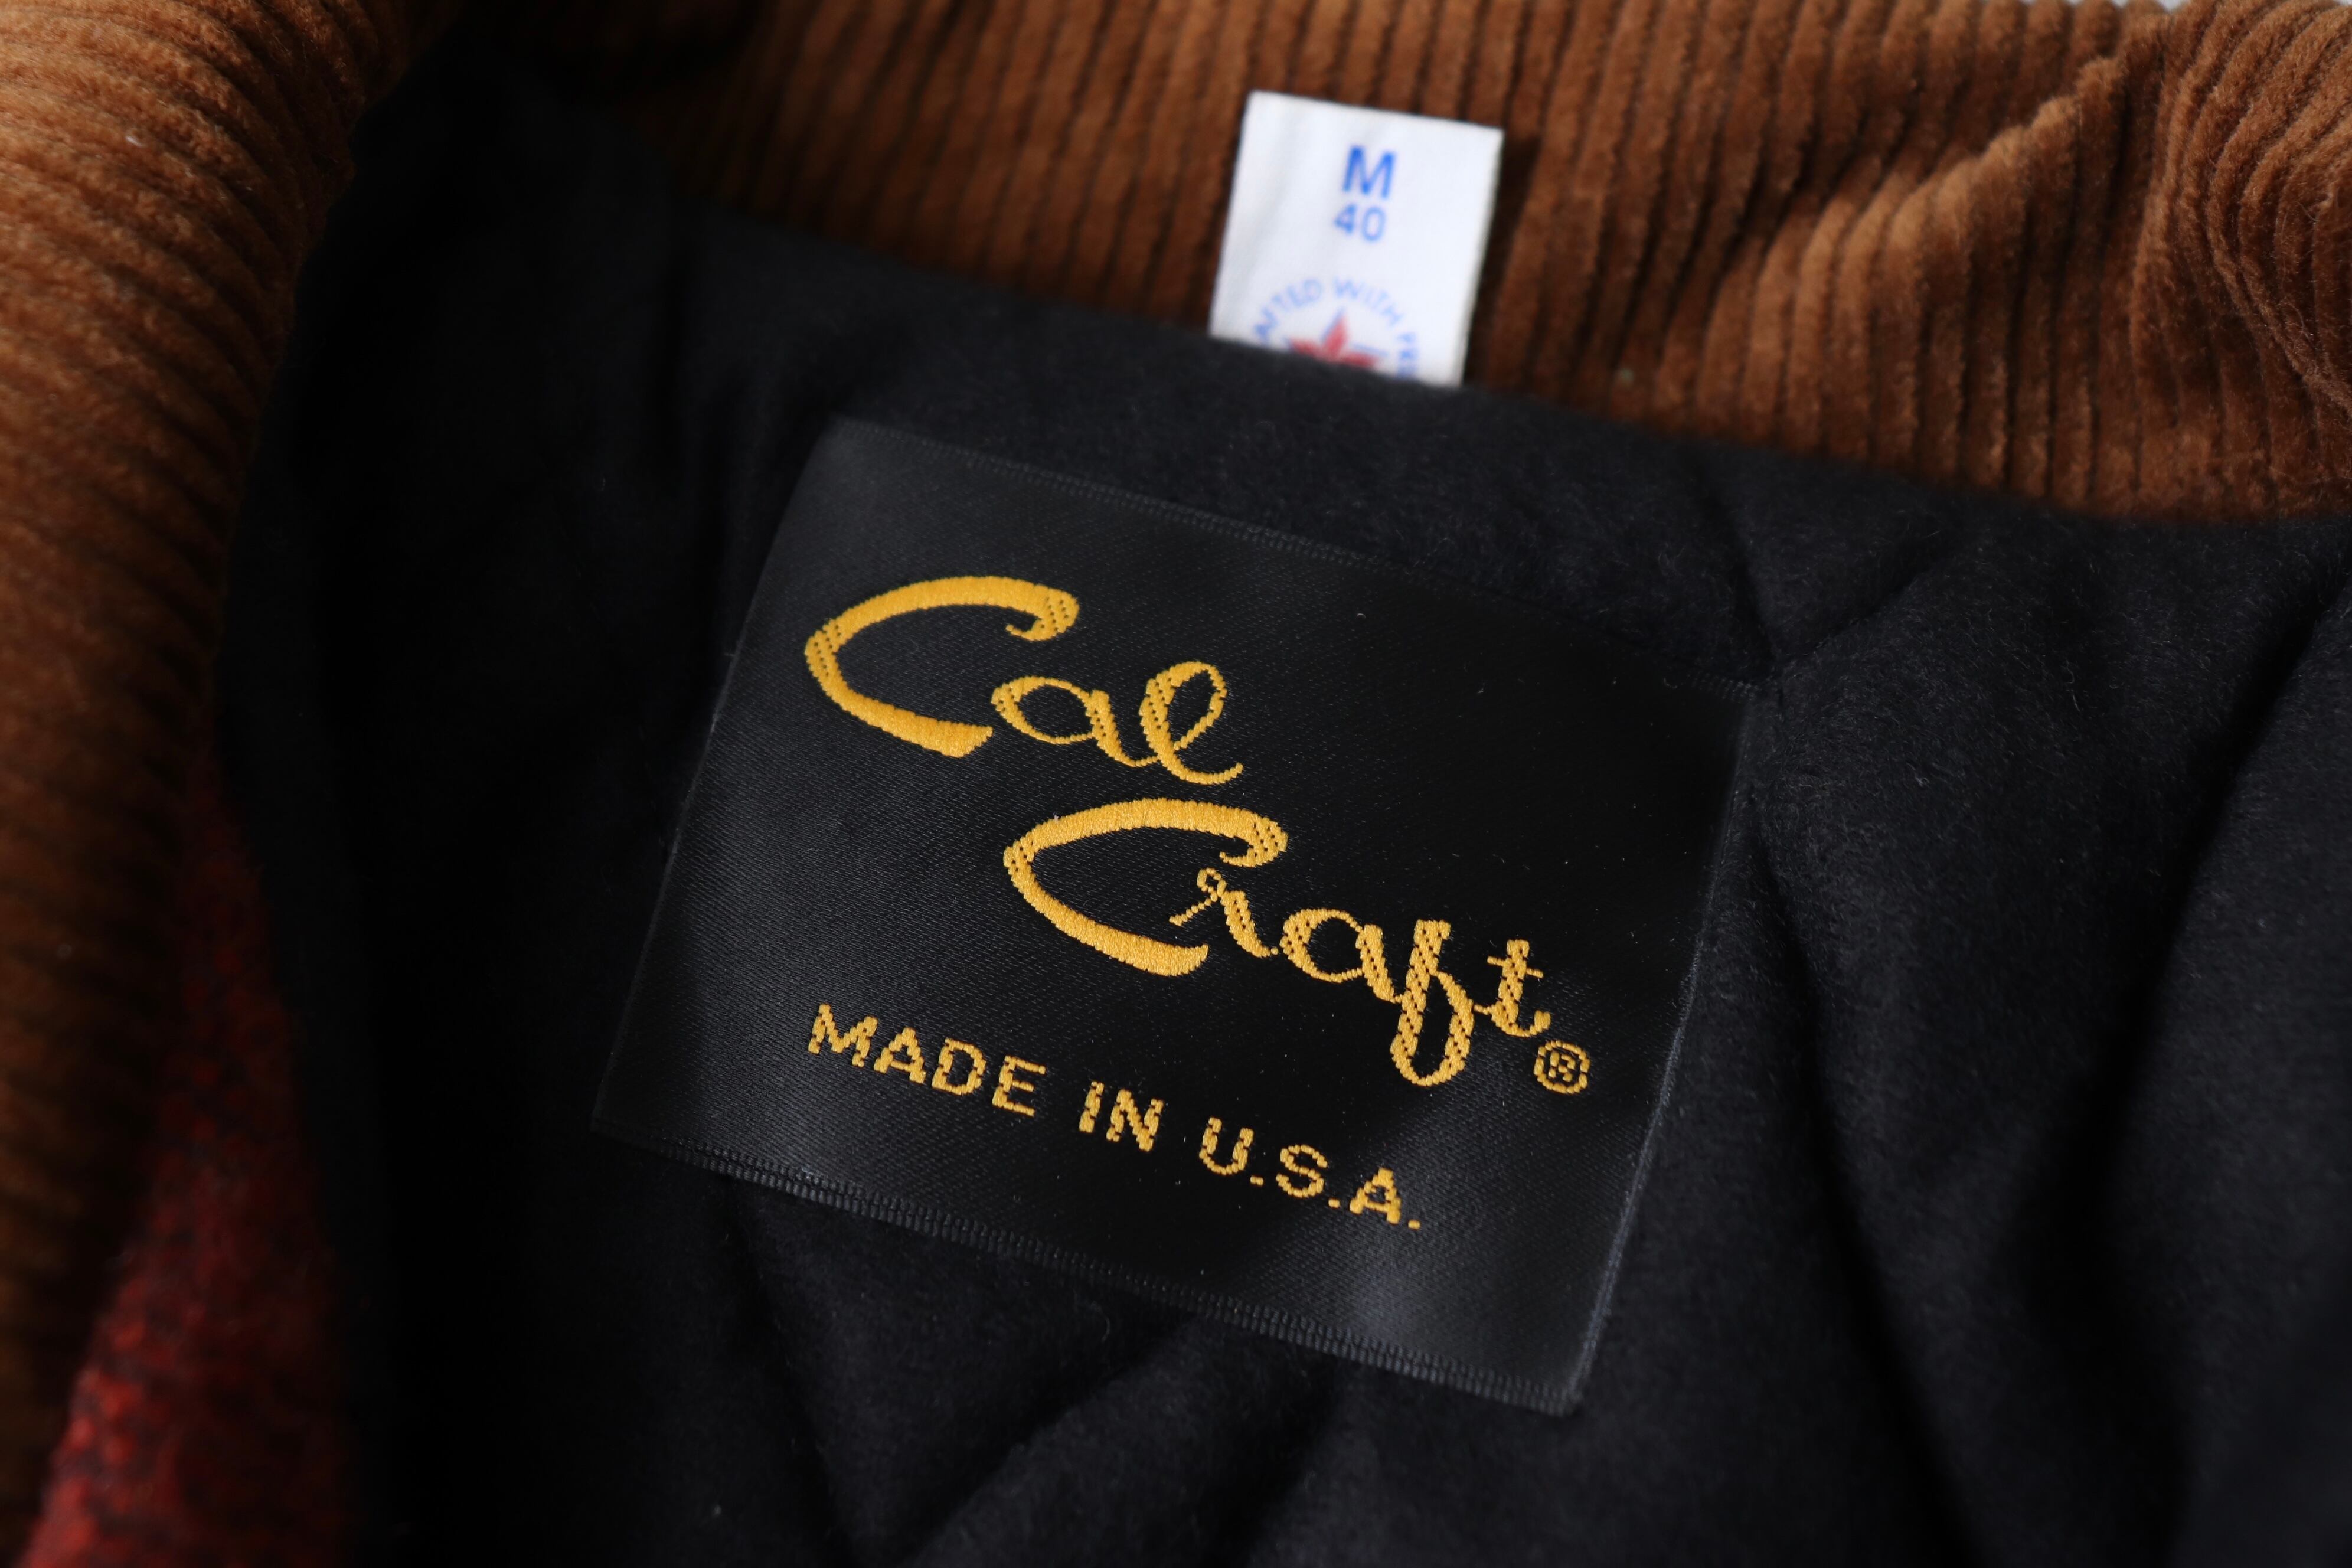 1990s Cal Craft Duffle Jacket M・L Deadstock B363 | ROGER'S ...